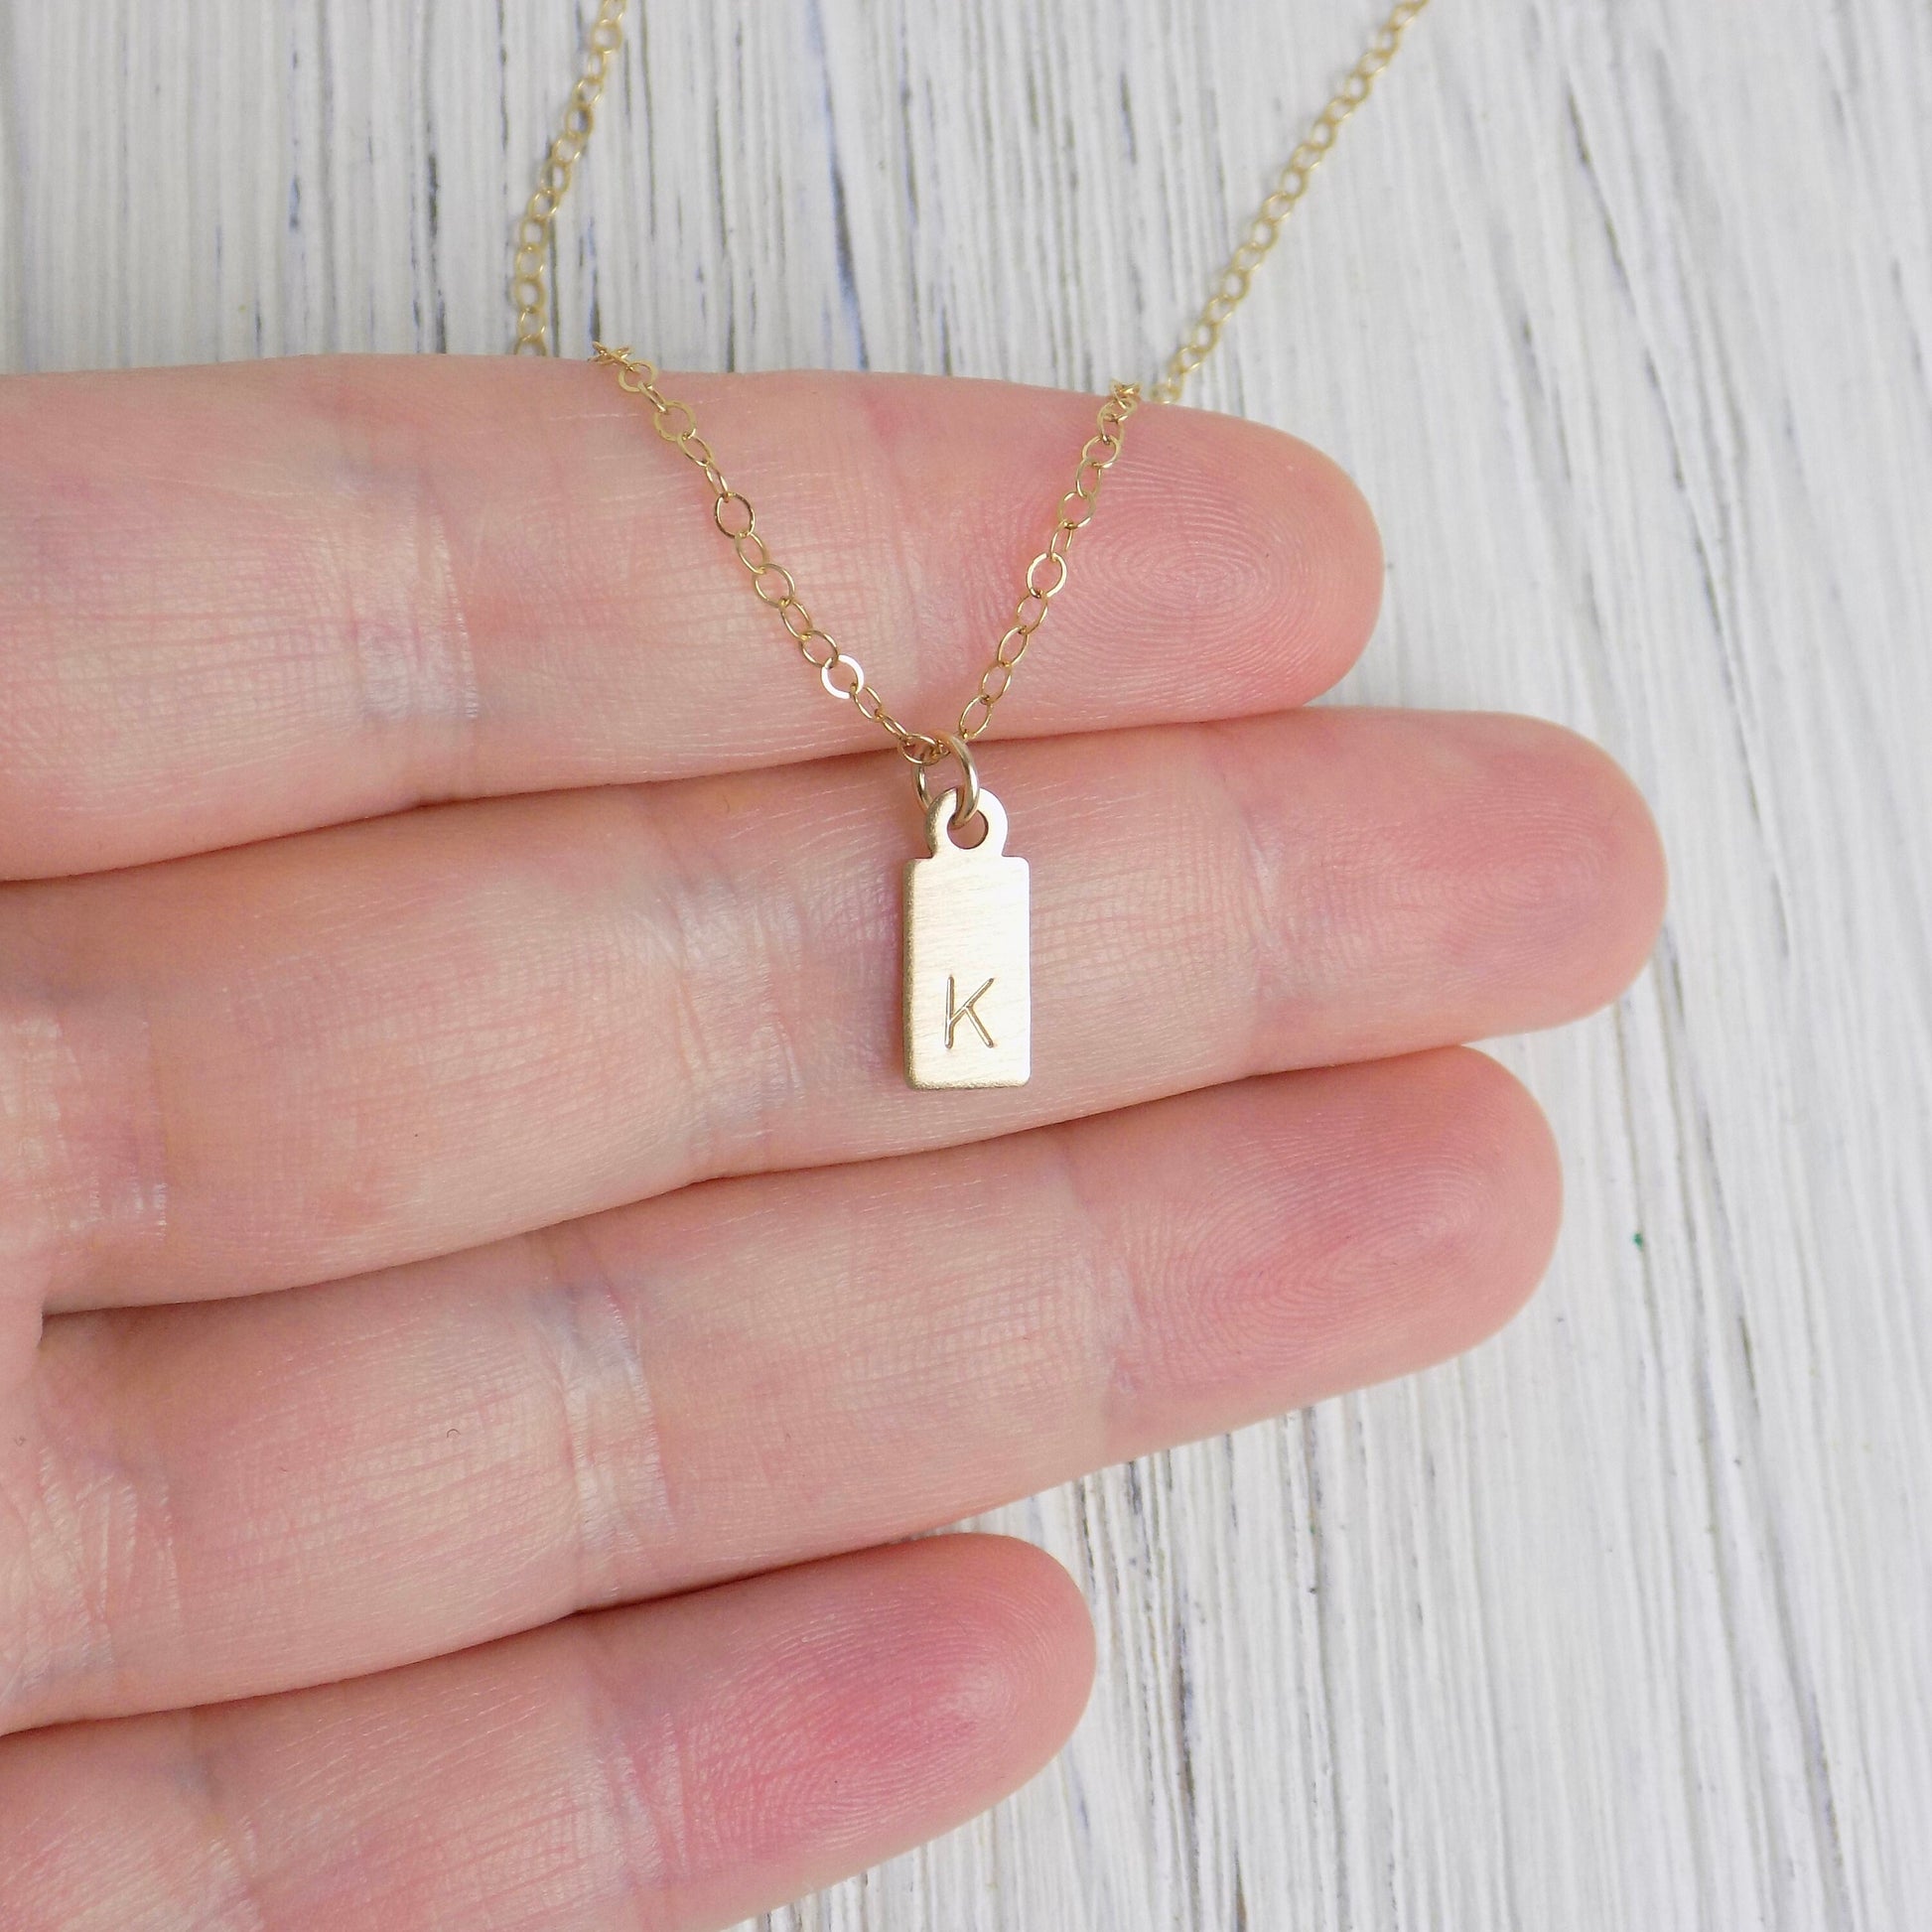 Dainty Tag Necklace - Initial Necklace - 14K Gold Filled Brushed Matte Satin Finish - Personalized Necklace Layering - Birthday Gift Women